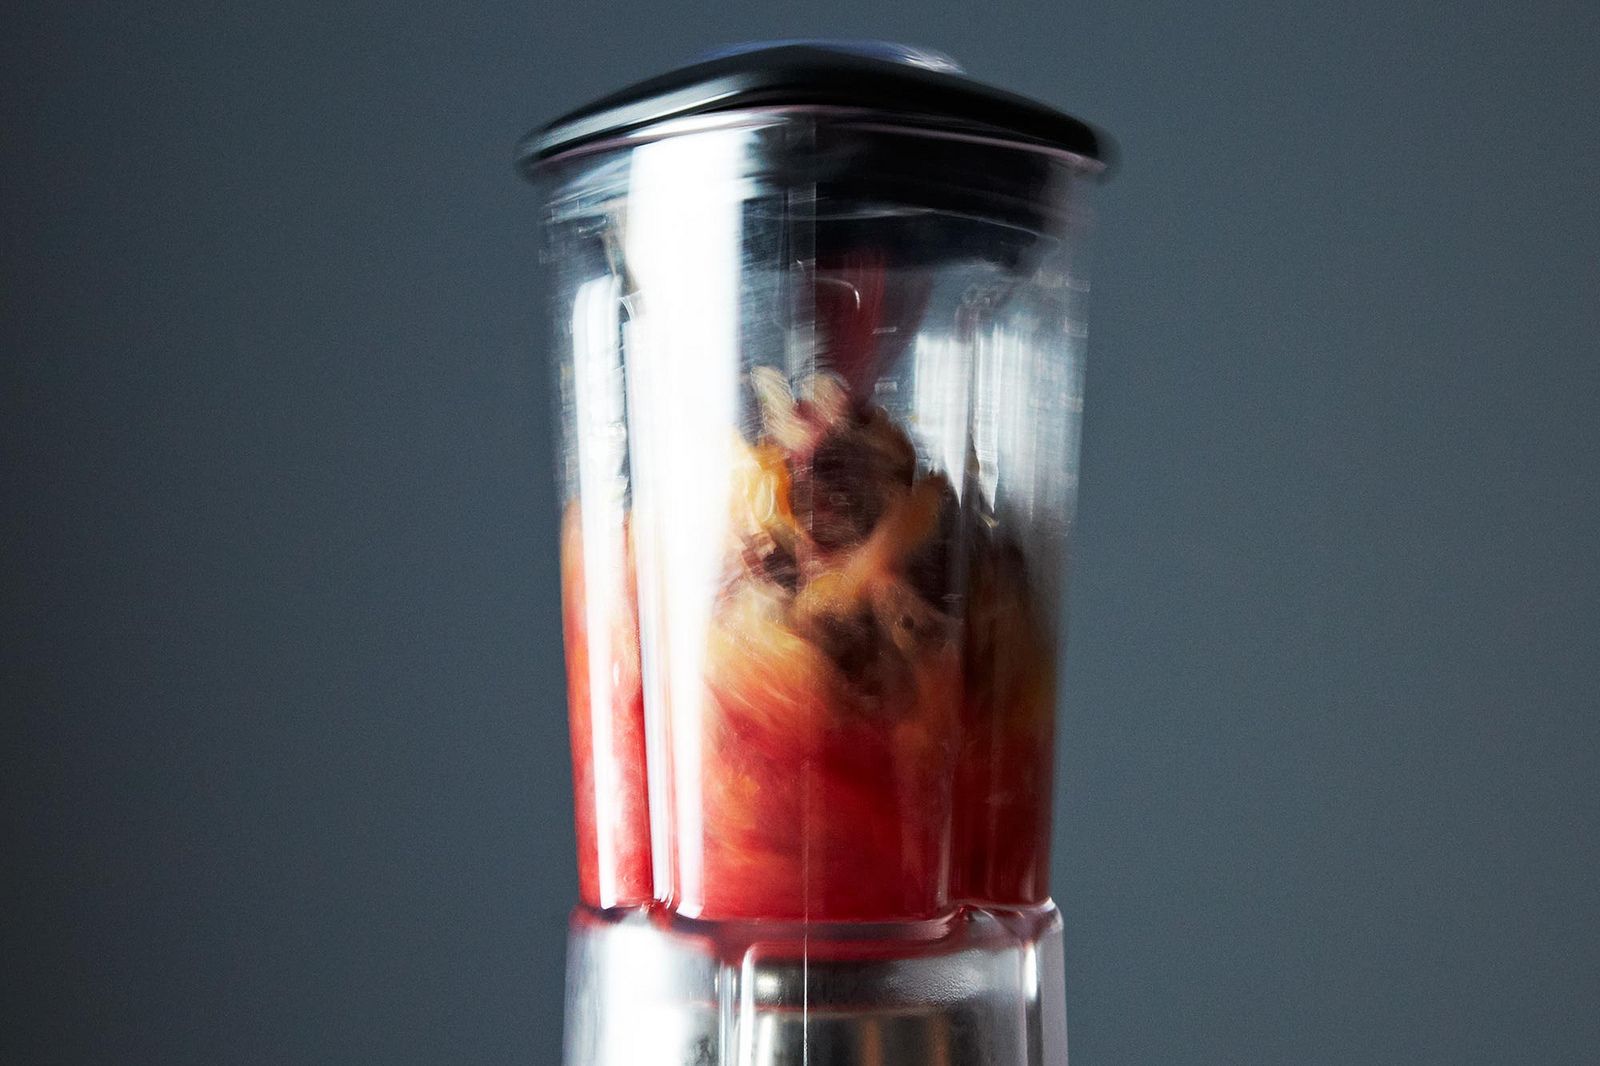 How to Make Juice Without a Juicer, from Food52